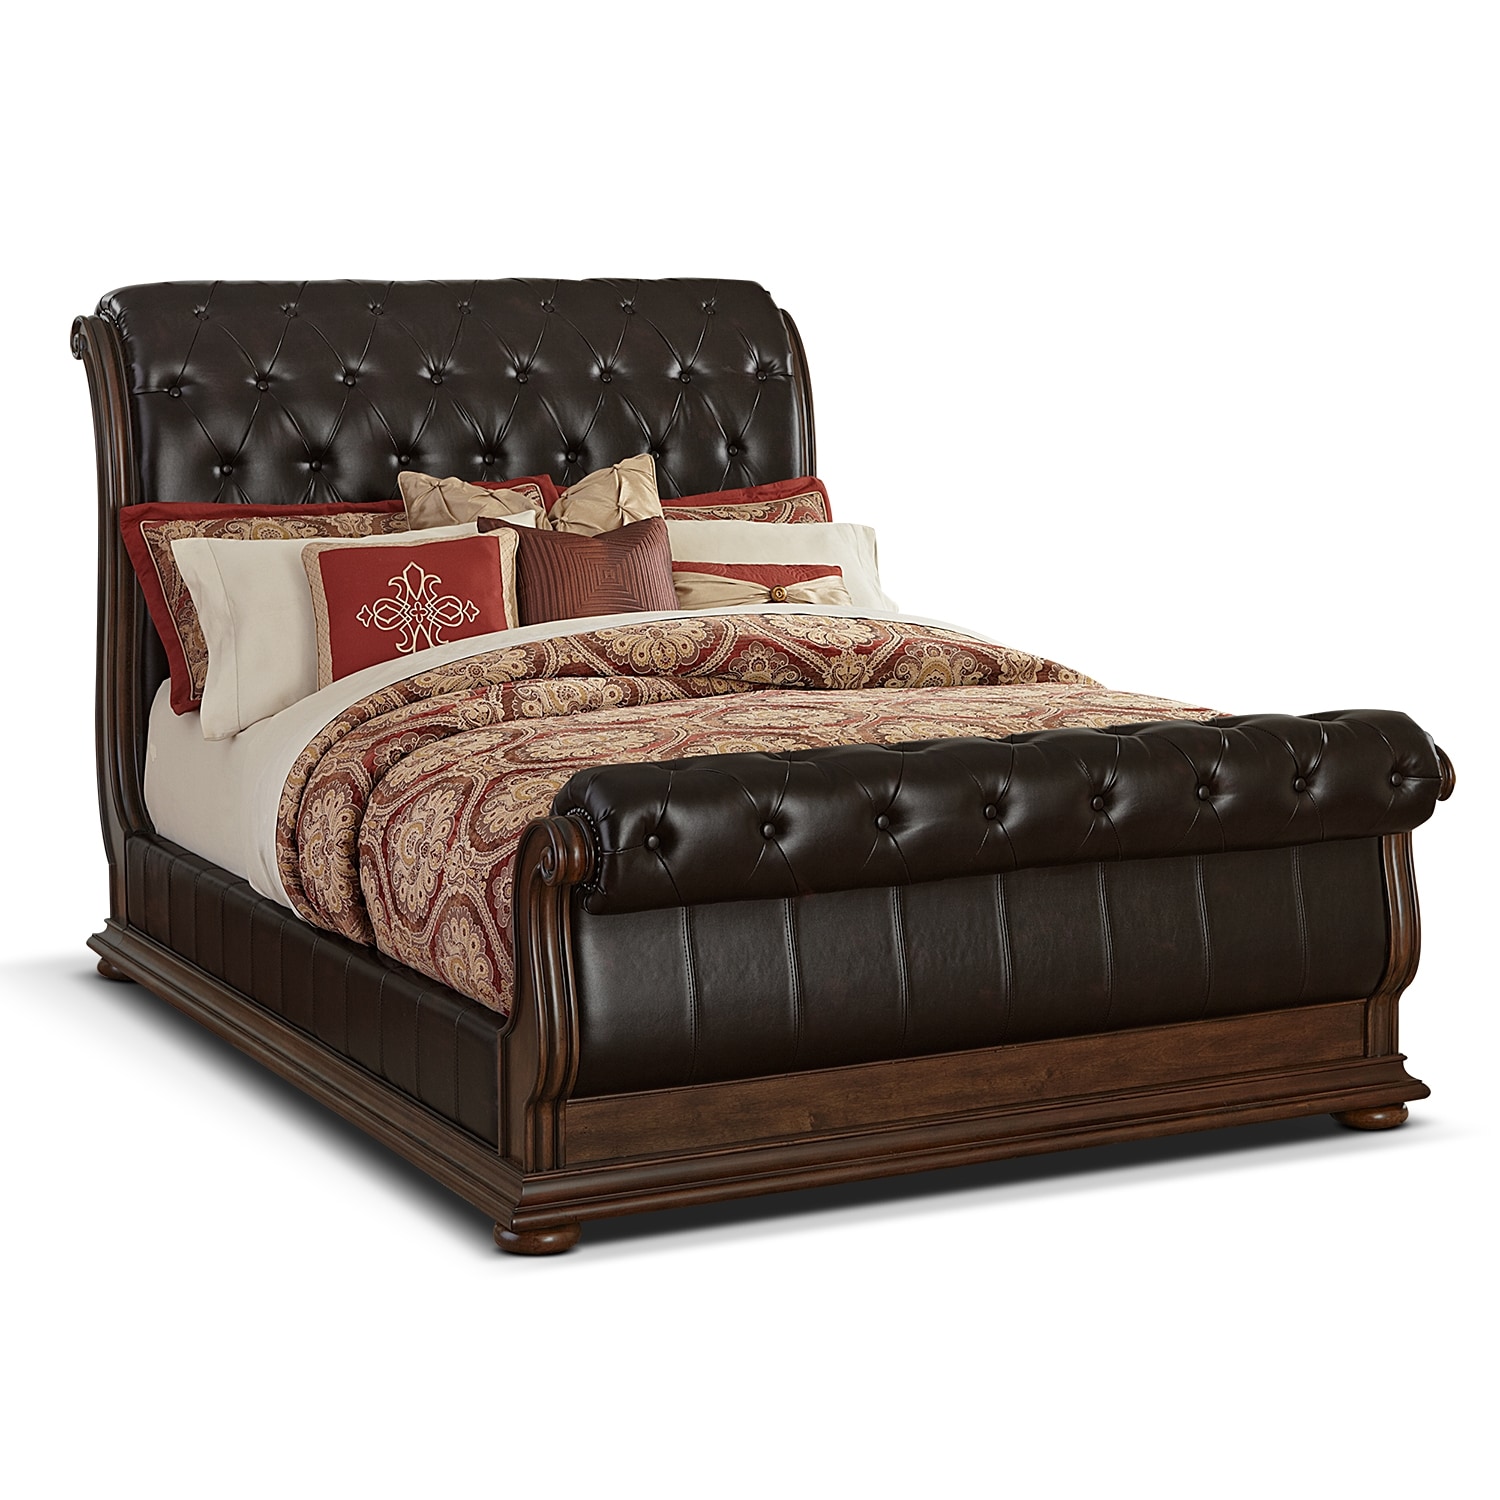 Monticello Queen Upholstered Sleigh Bed - Pecan | Value City Furniture and Mattresses